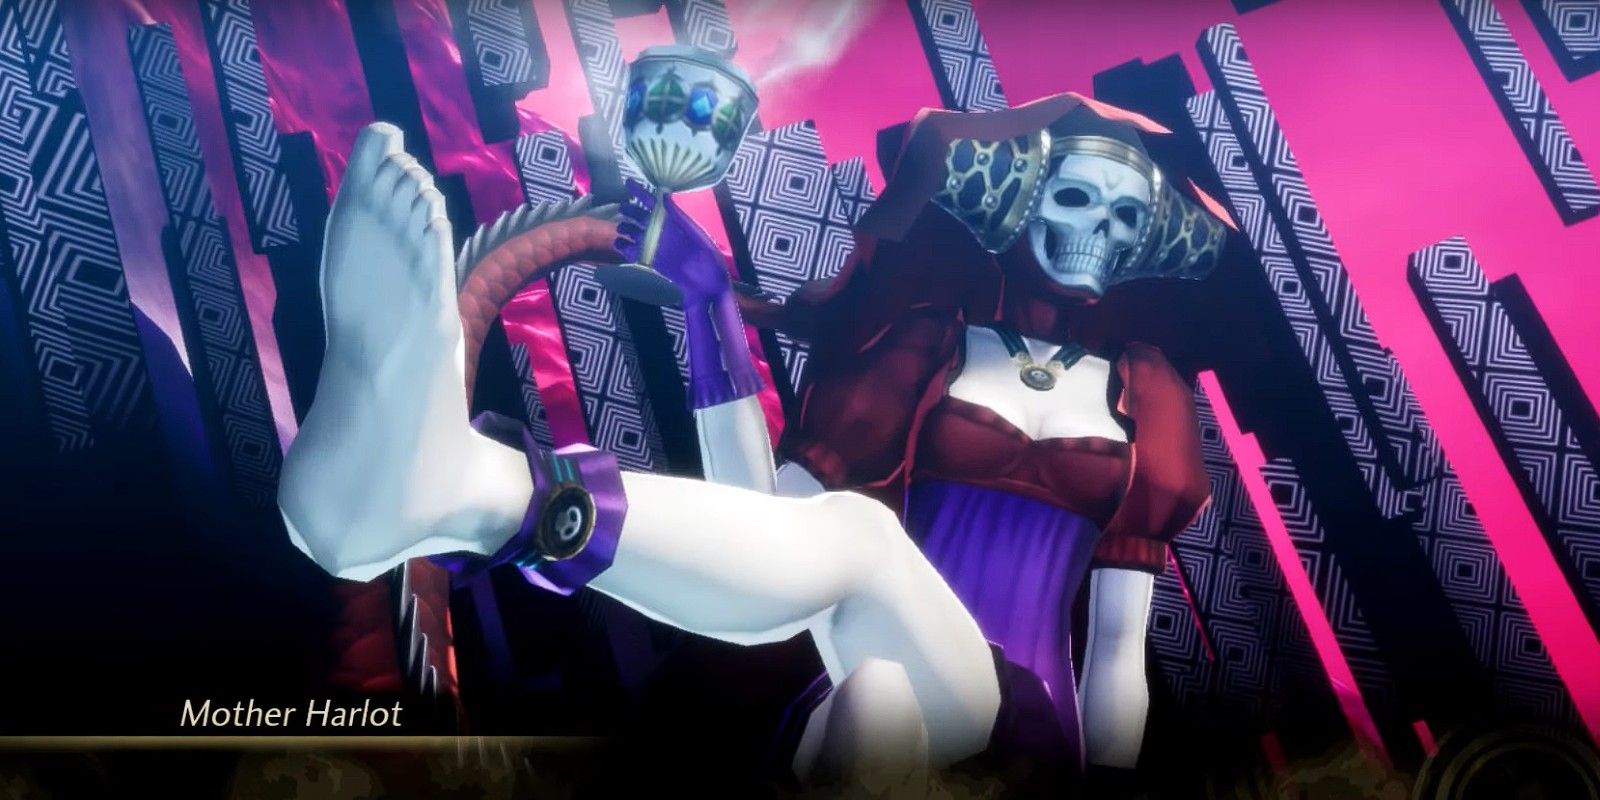 Mother Harlot taunts the player before the boss fight in Shin Megami Tensei V